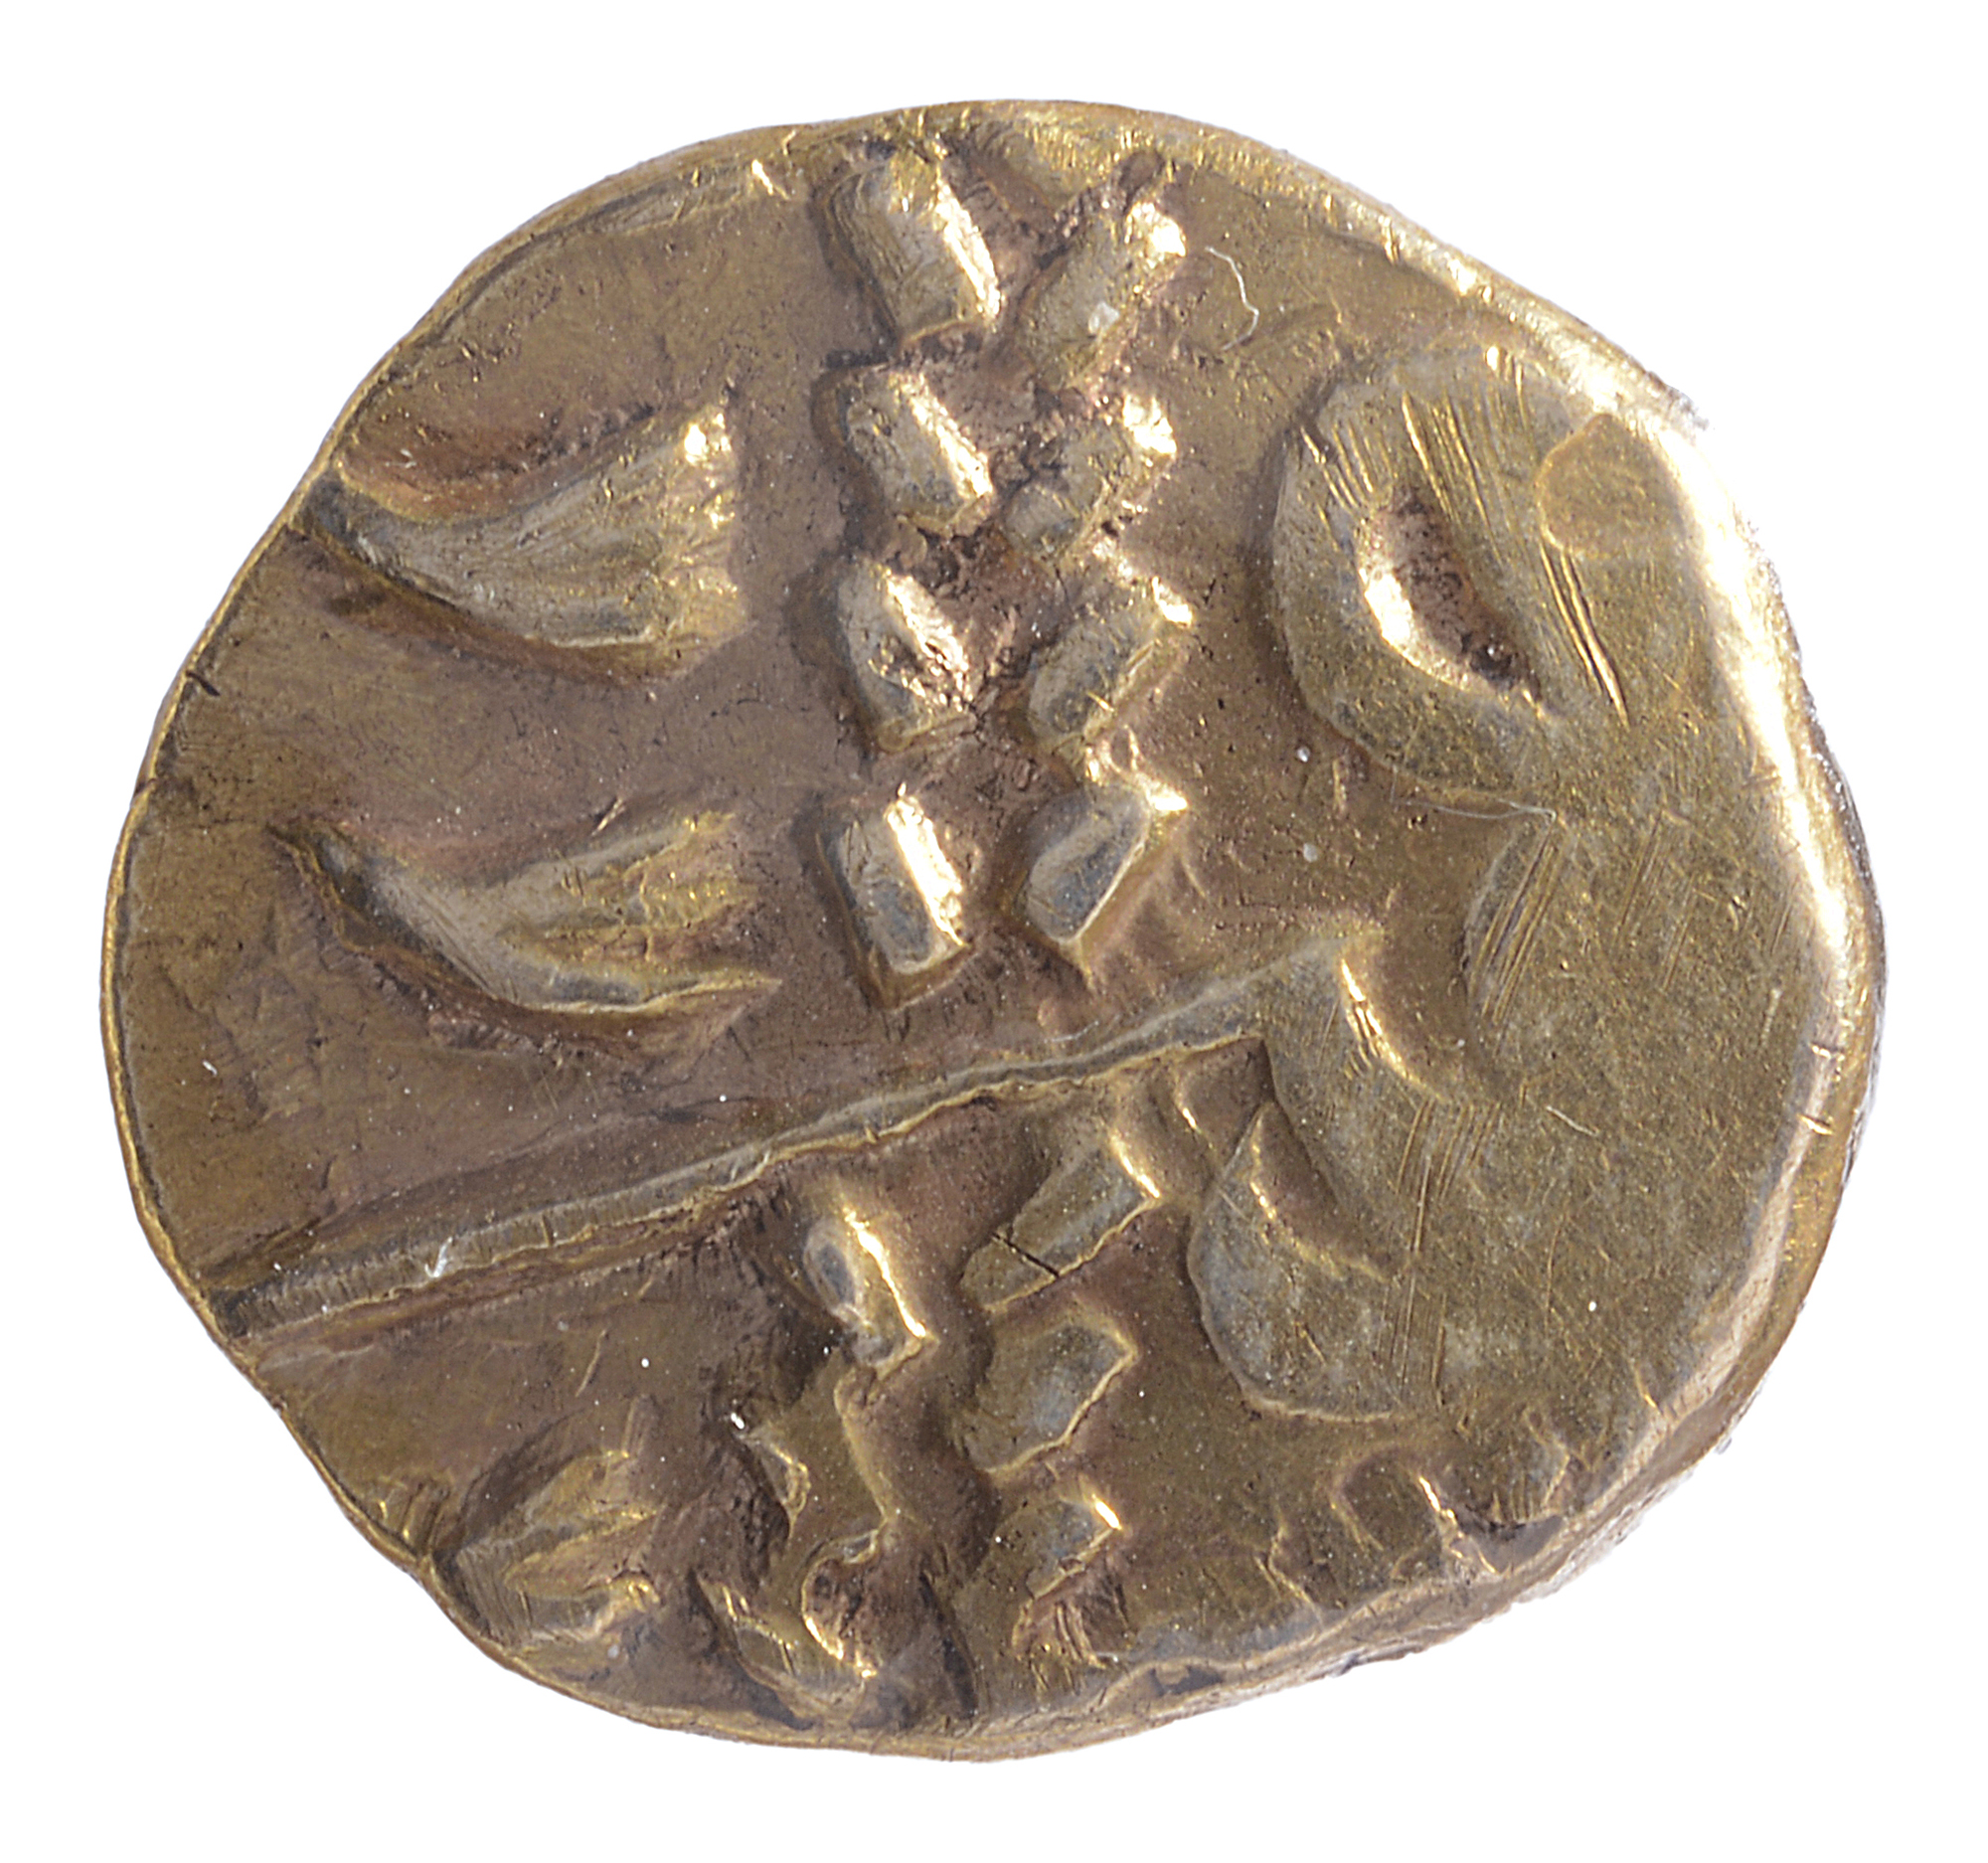 Celtic Britain, Corieltauvi, Gold Stater, c. 60-50 BCNorth East Coast type,disjointed horse facing - Image 2 of 2